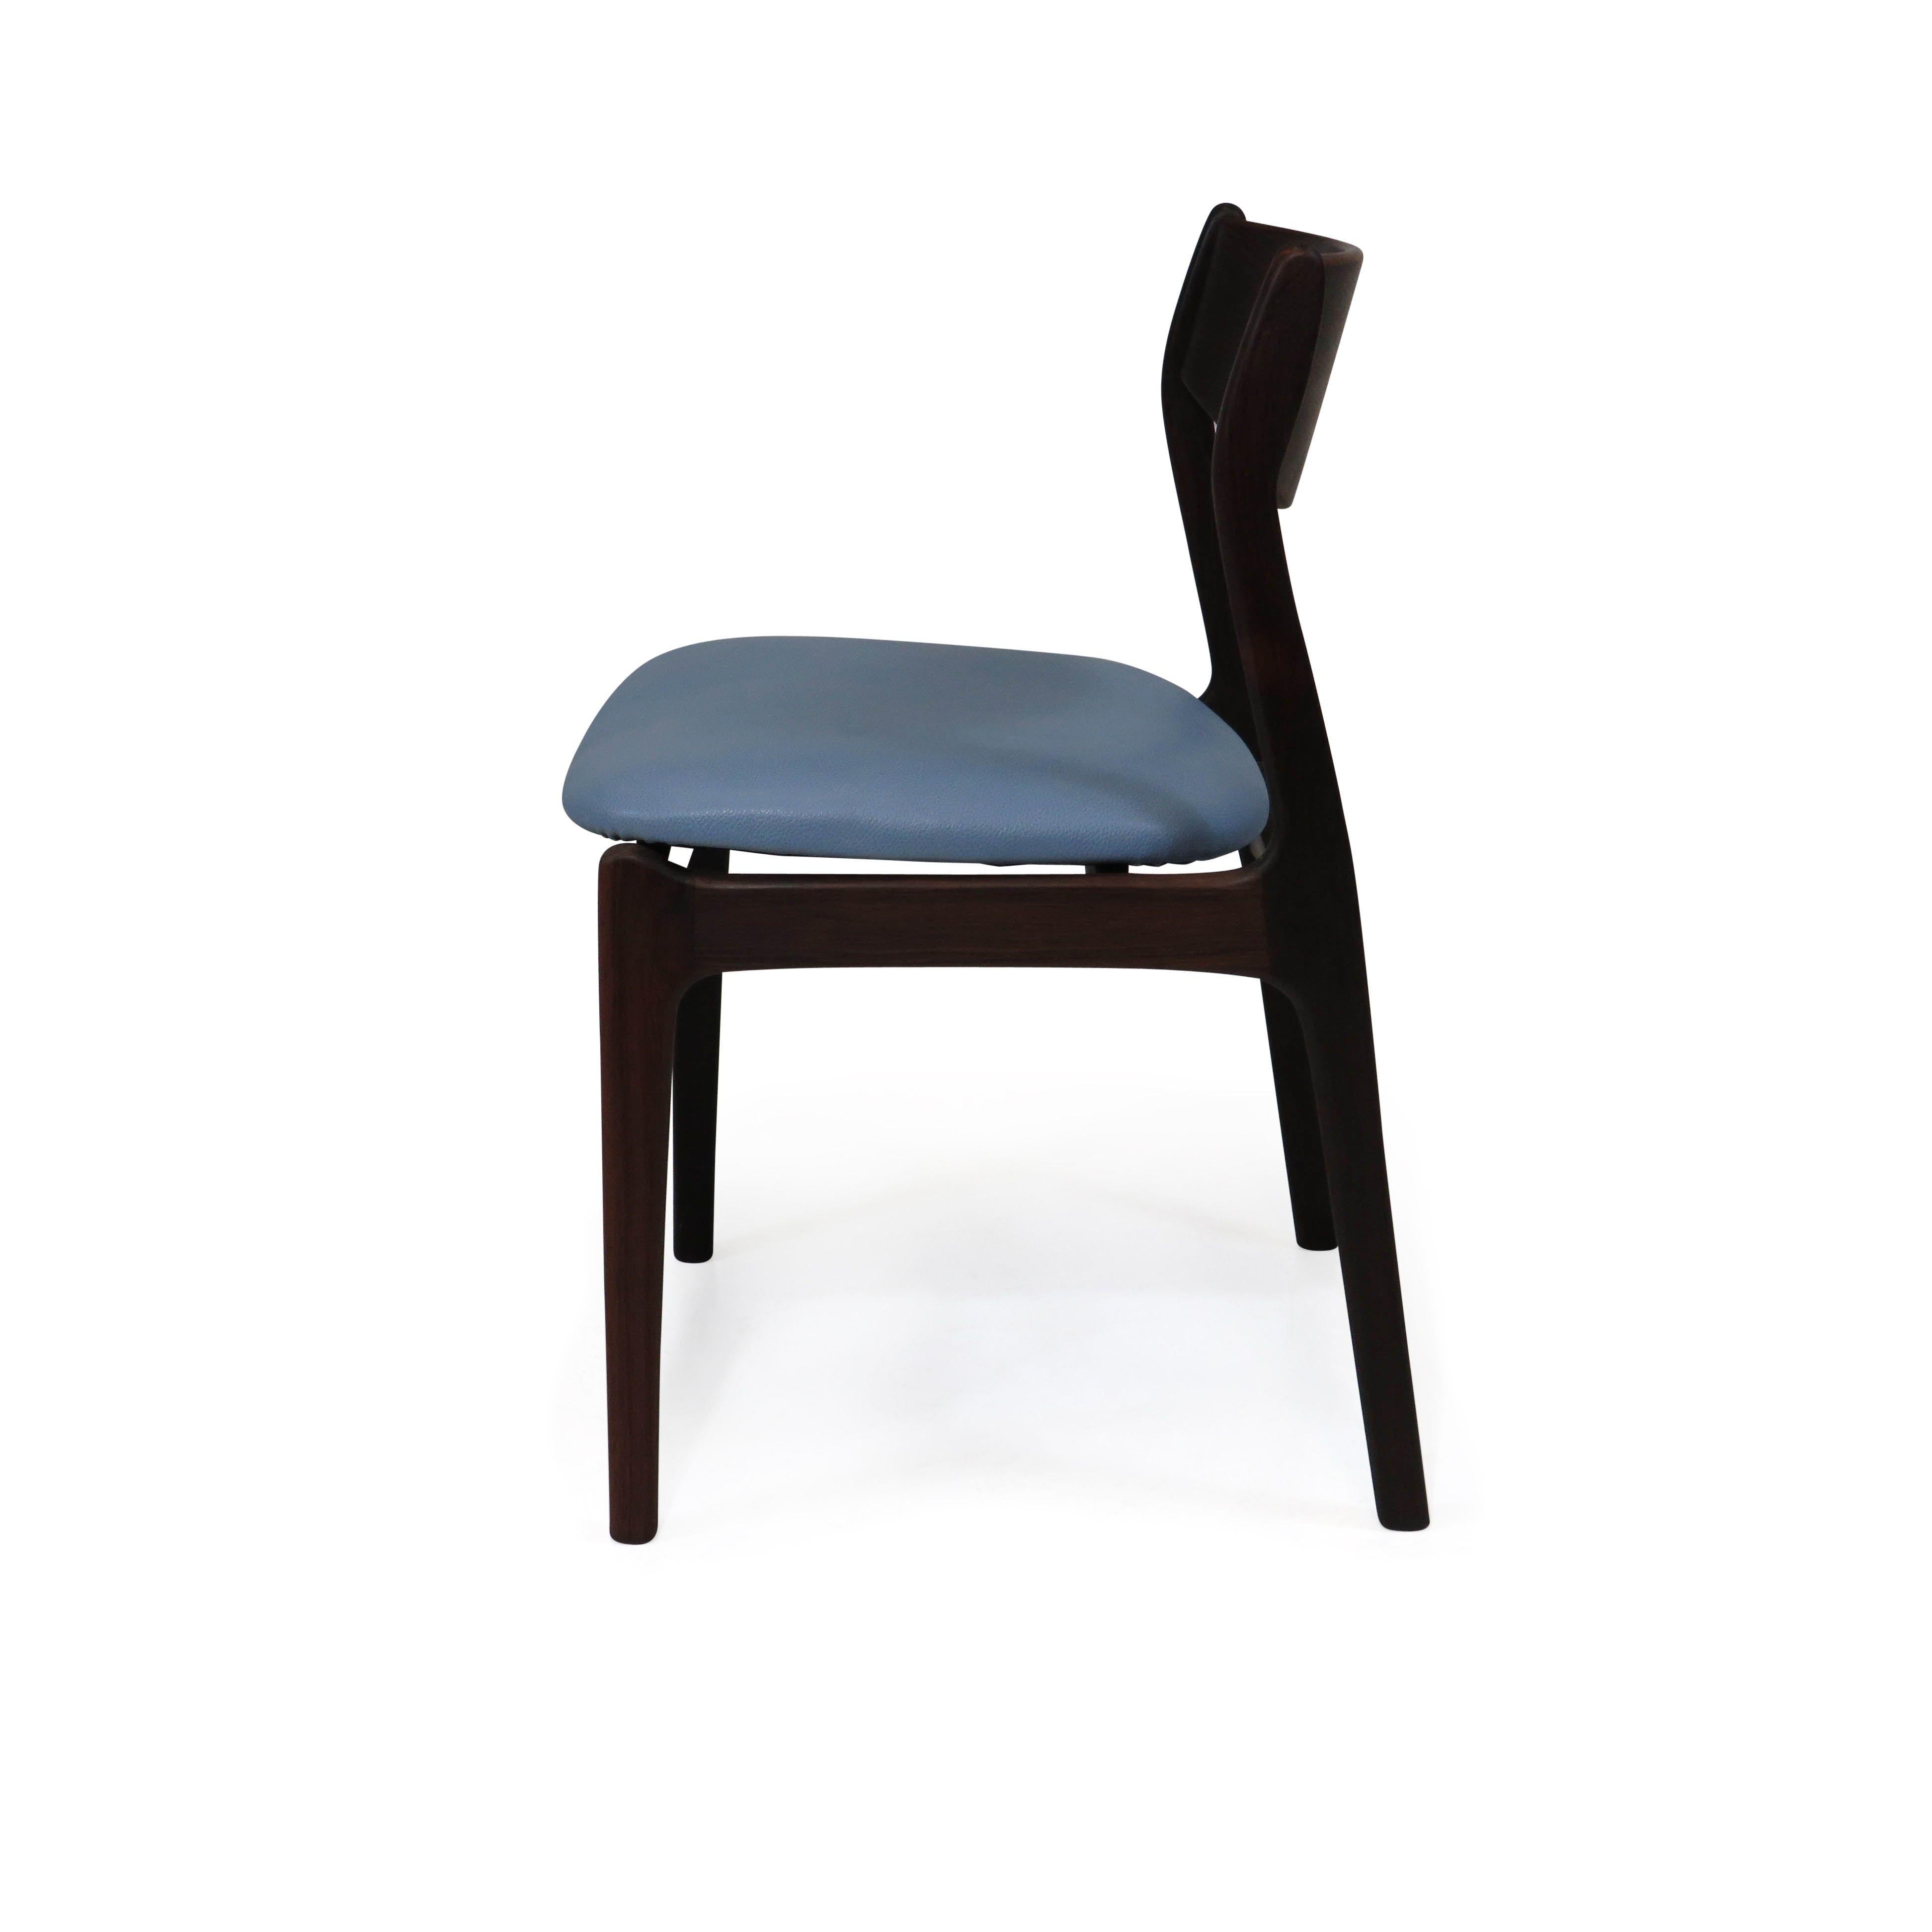 Four PE Jorgensen Danish Rosewood Dining Chairs in Sky Blue Leather For Sale 2